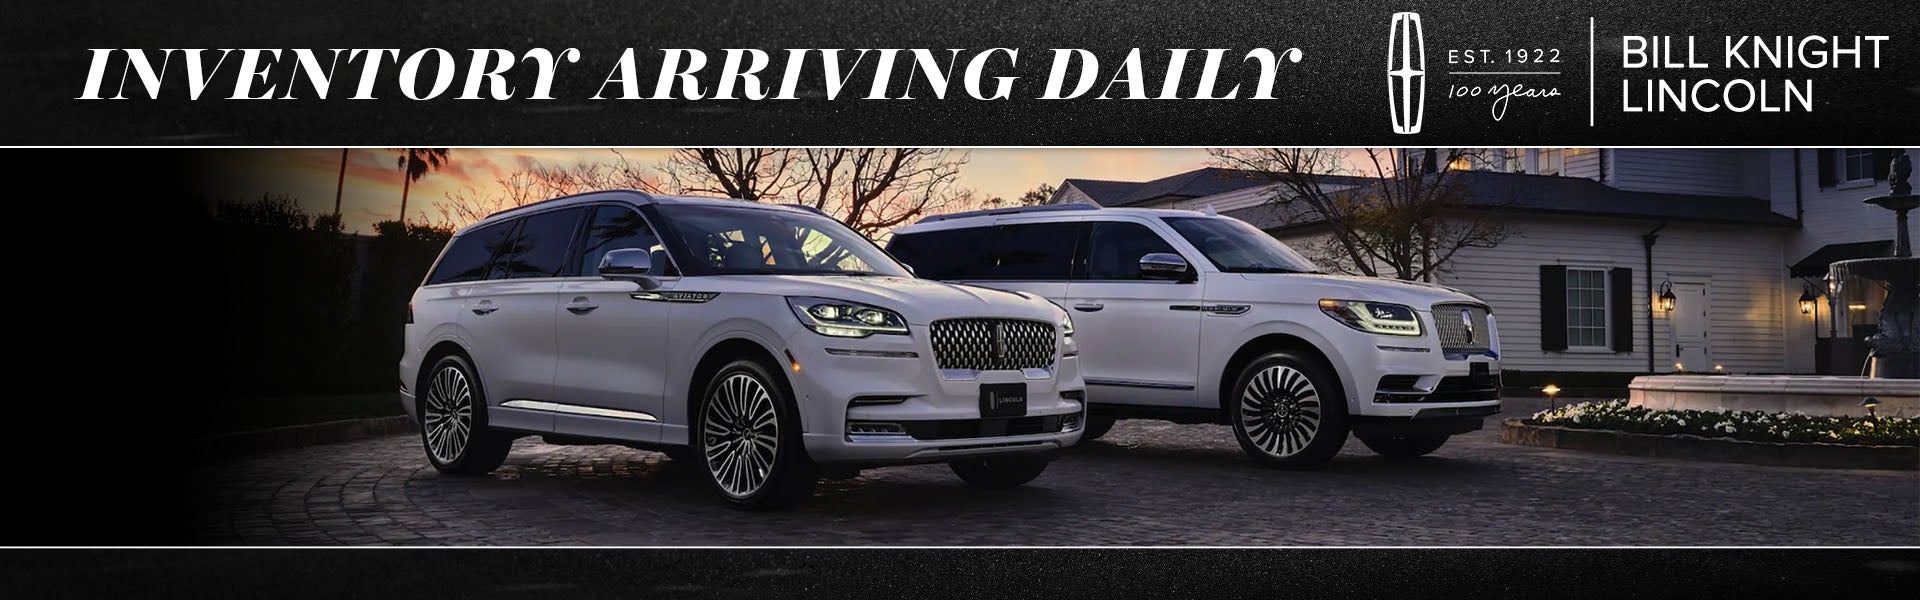 Lincoln inventory arriving daily at Bill Knight Lincoln!